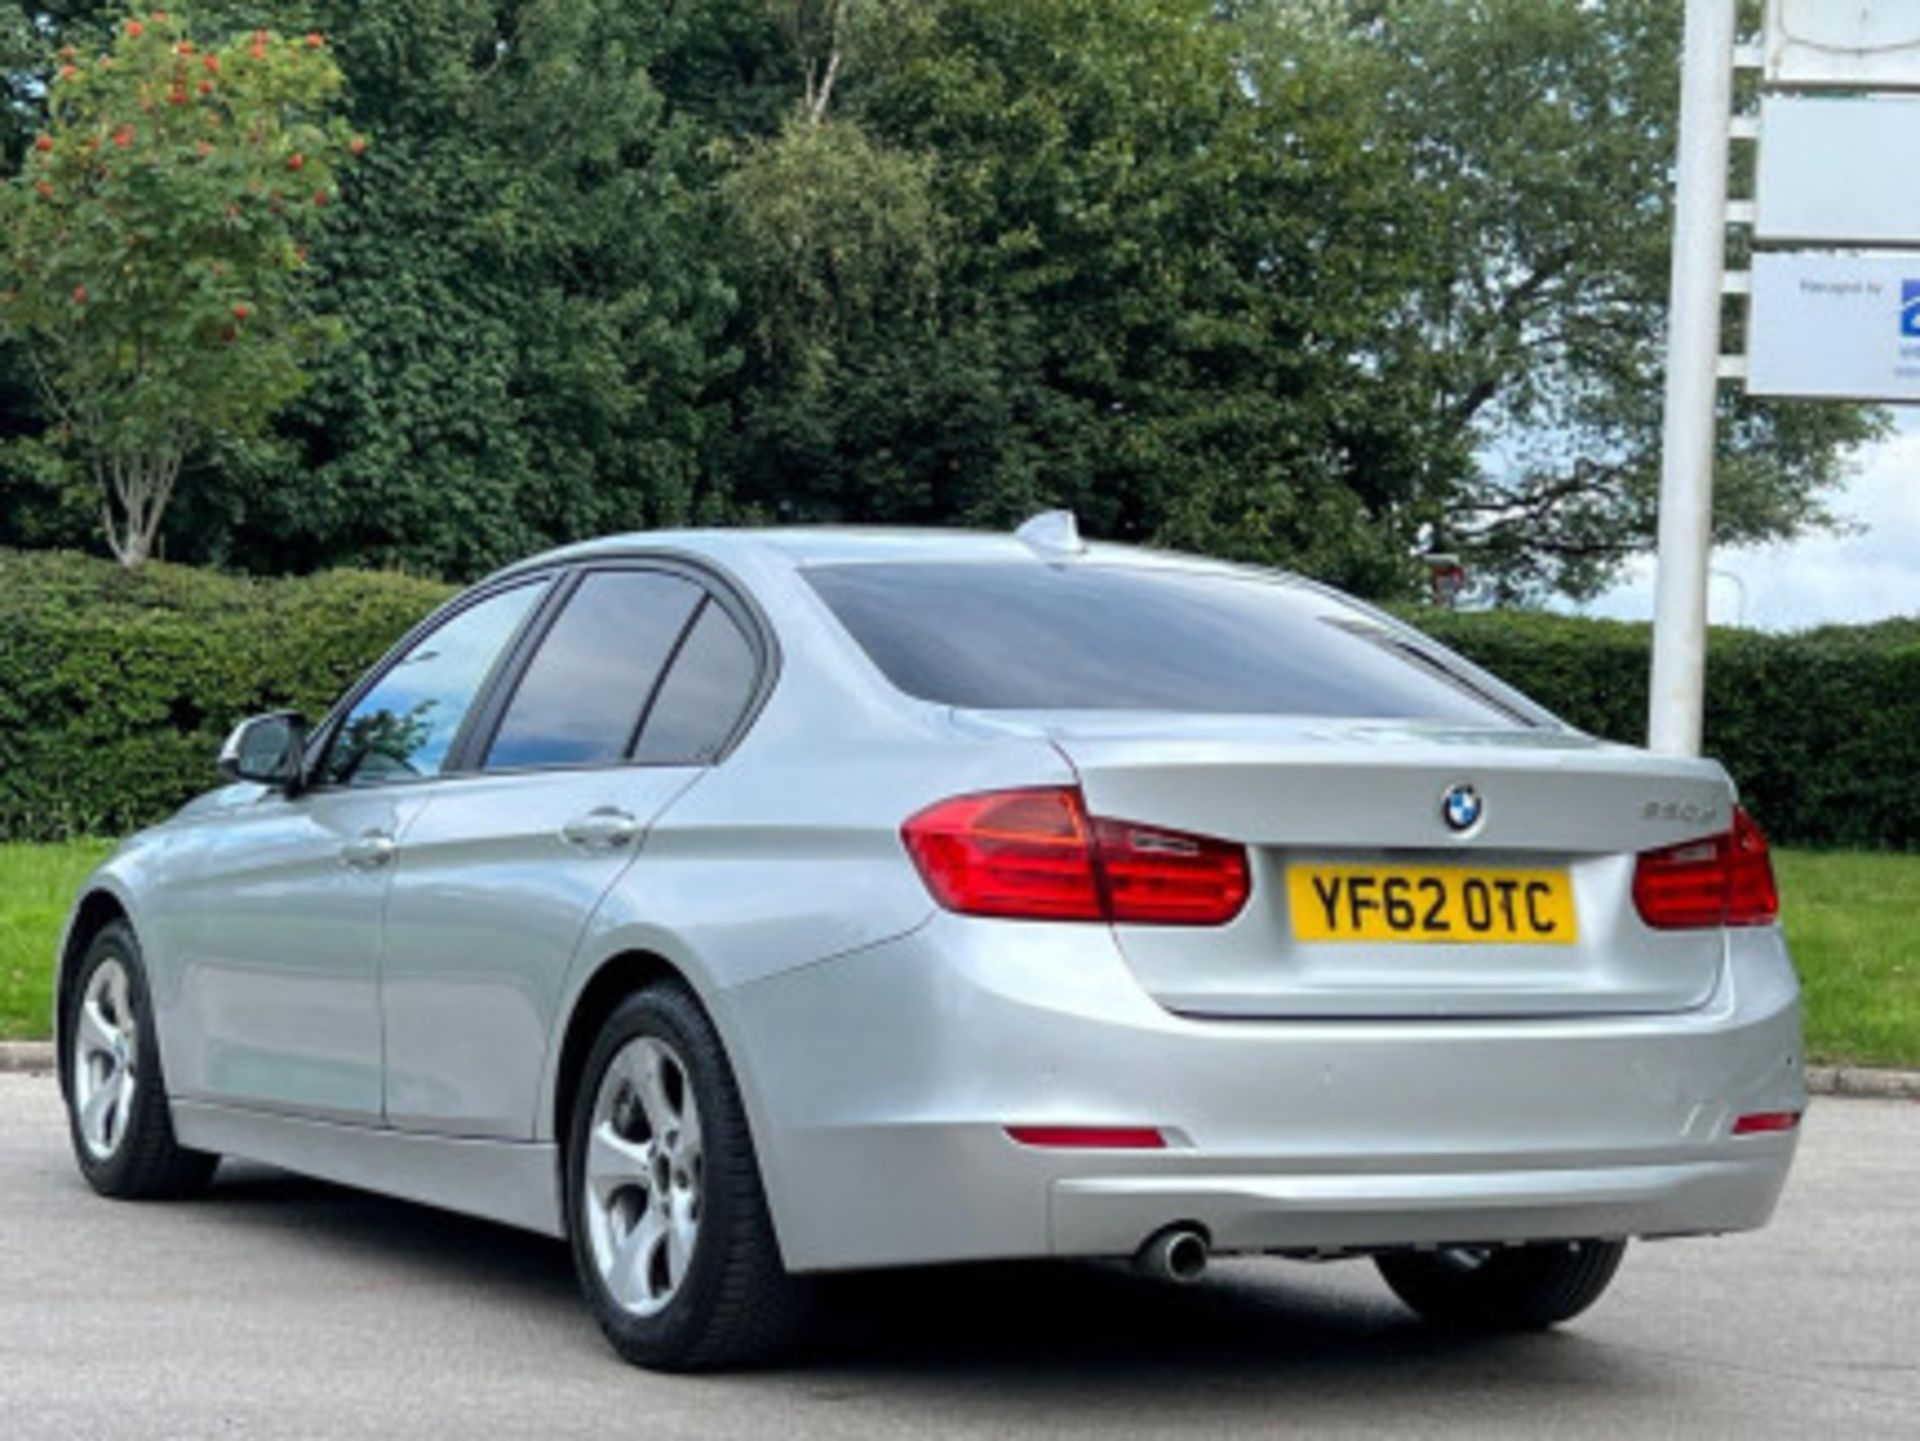 BMW 3 SERIES 2.0 DIESEL ED START STOP - A WELL-MAINTAINED GEM >>--NO VAT ON HAMMER--<< - Image 118 of 229